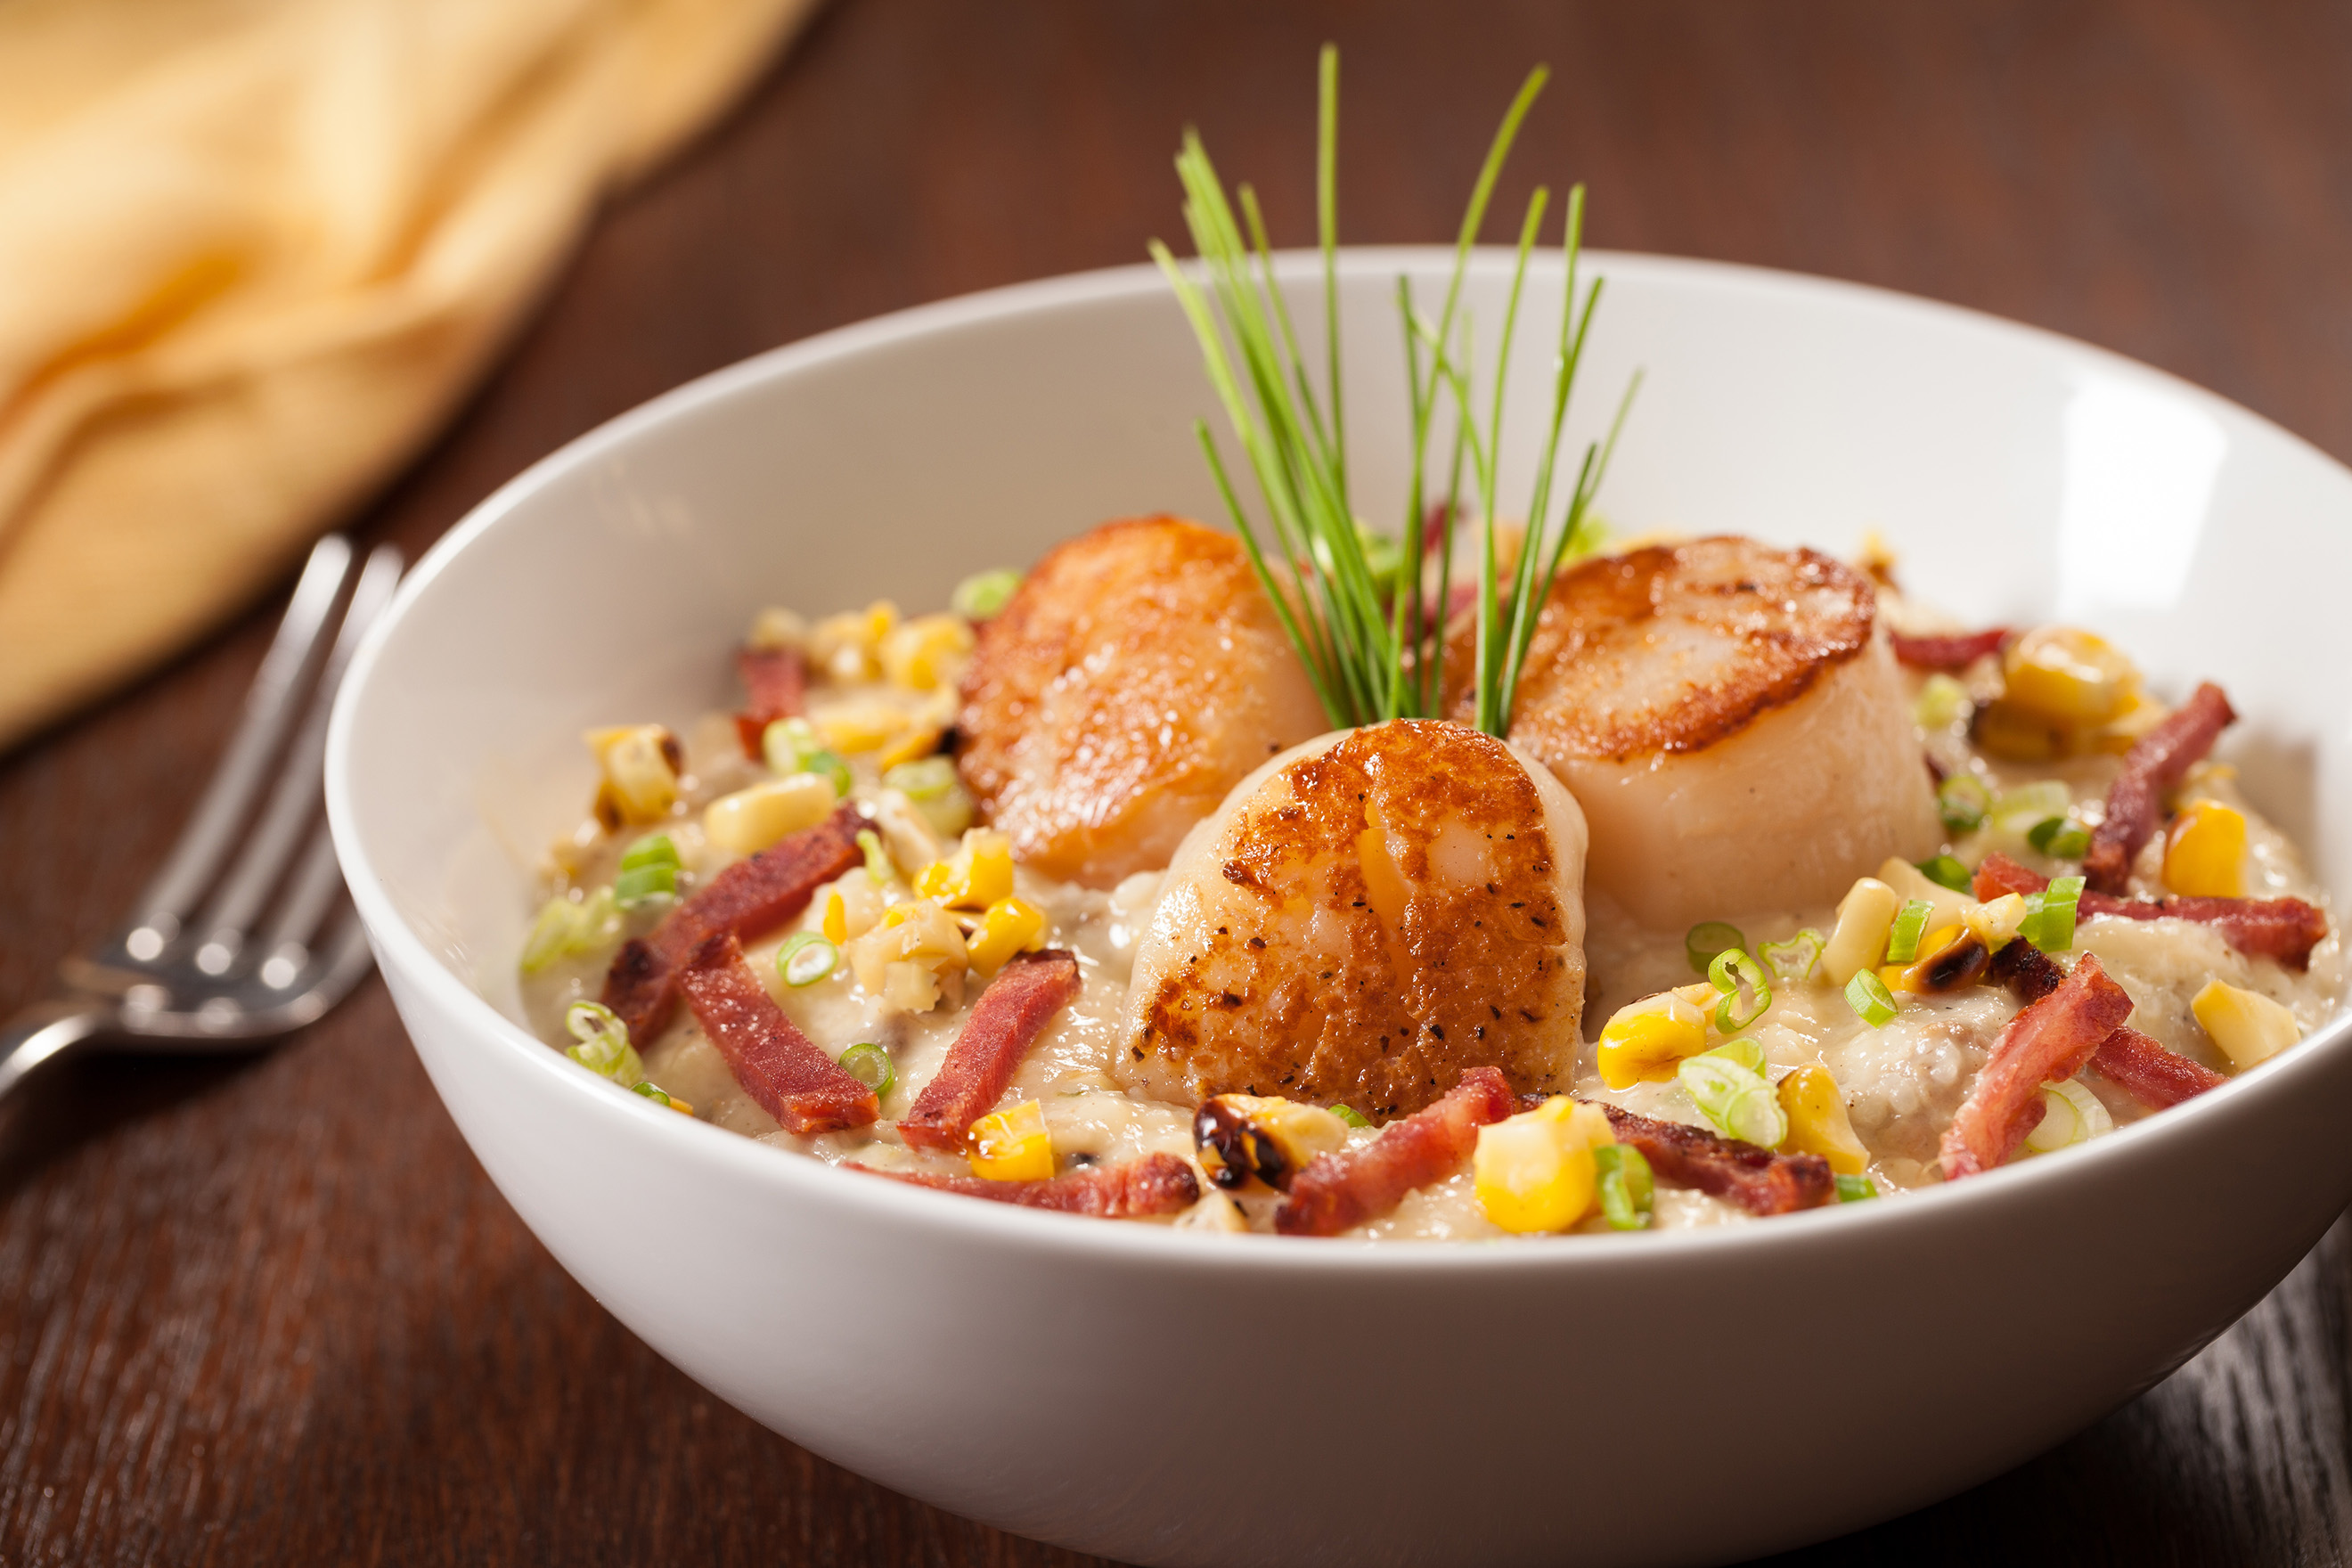 Second Runner-Up: Duck Fat Seared Scallops Over Cheddar Duck Corn Grits, Jill Gilber from Philadelphia, PA